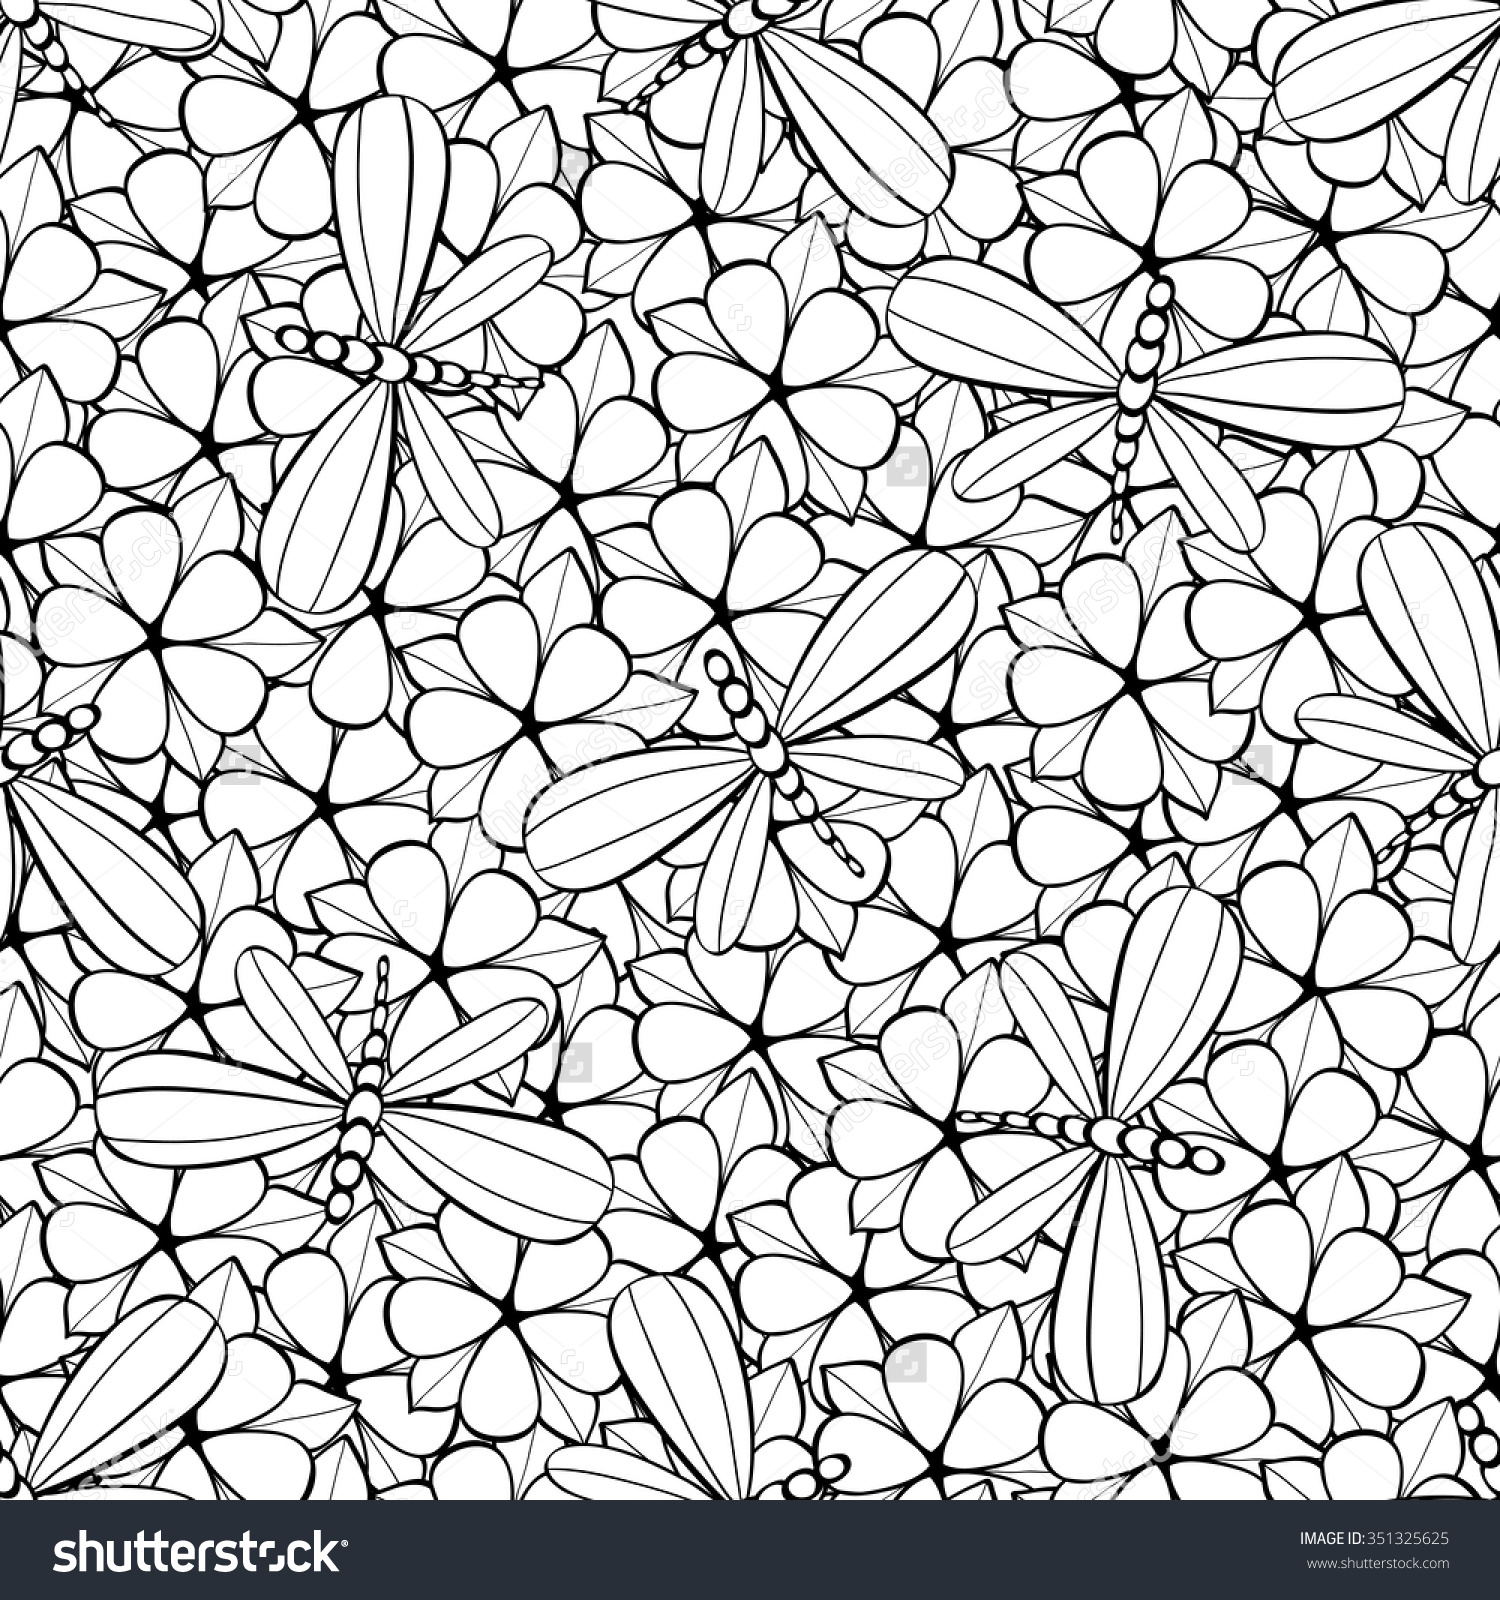 Adult Coloring Book Design With Floral Seamless Pattern